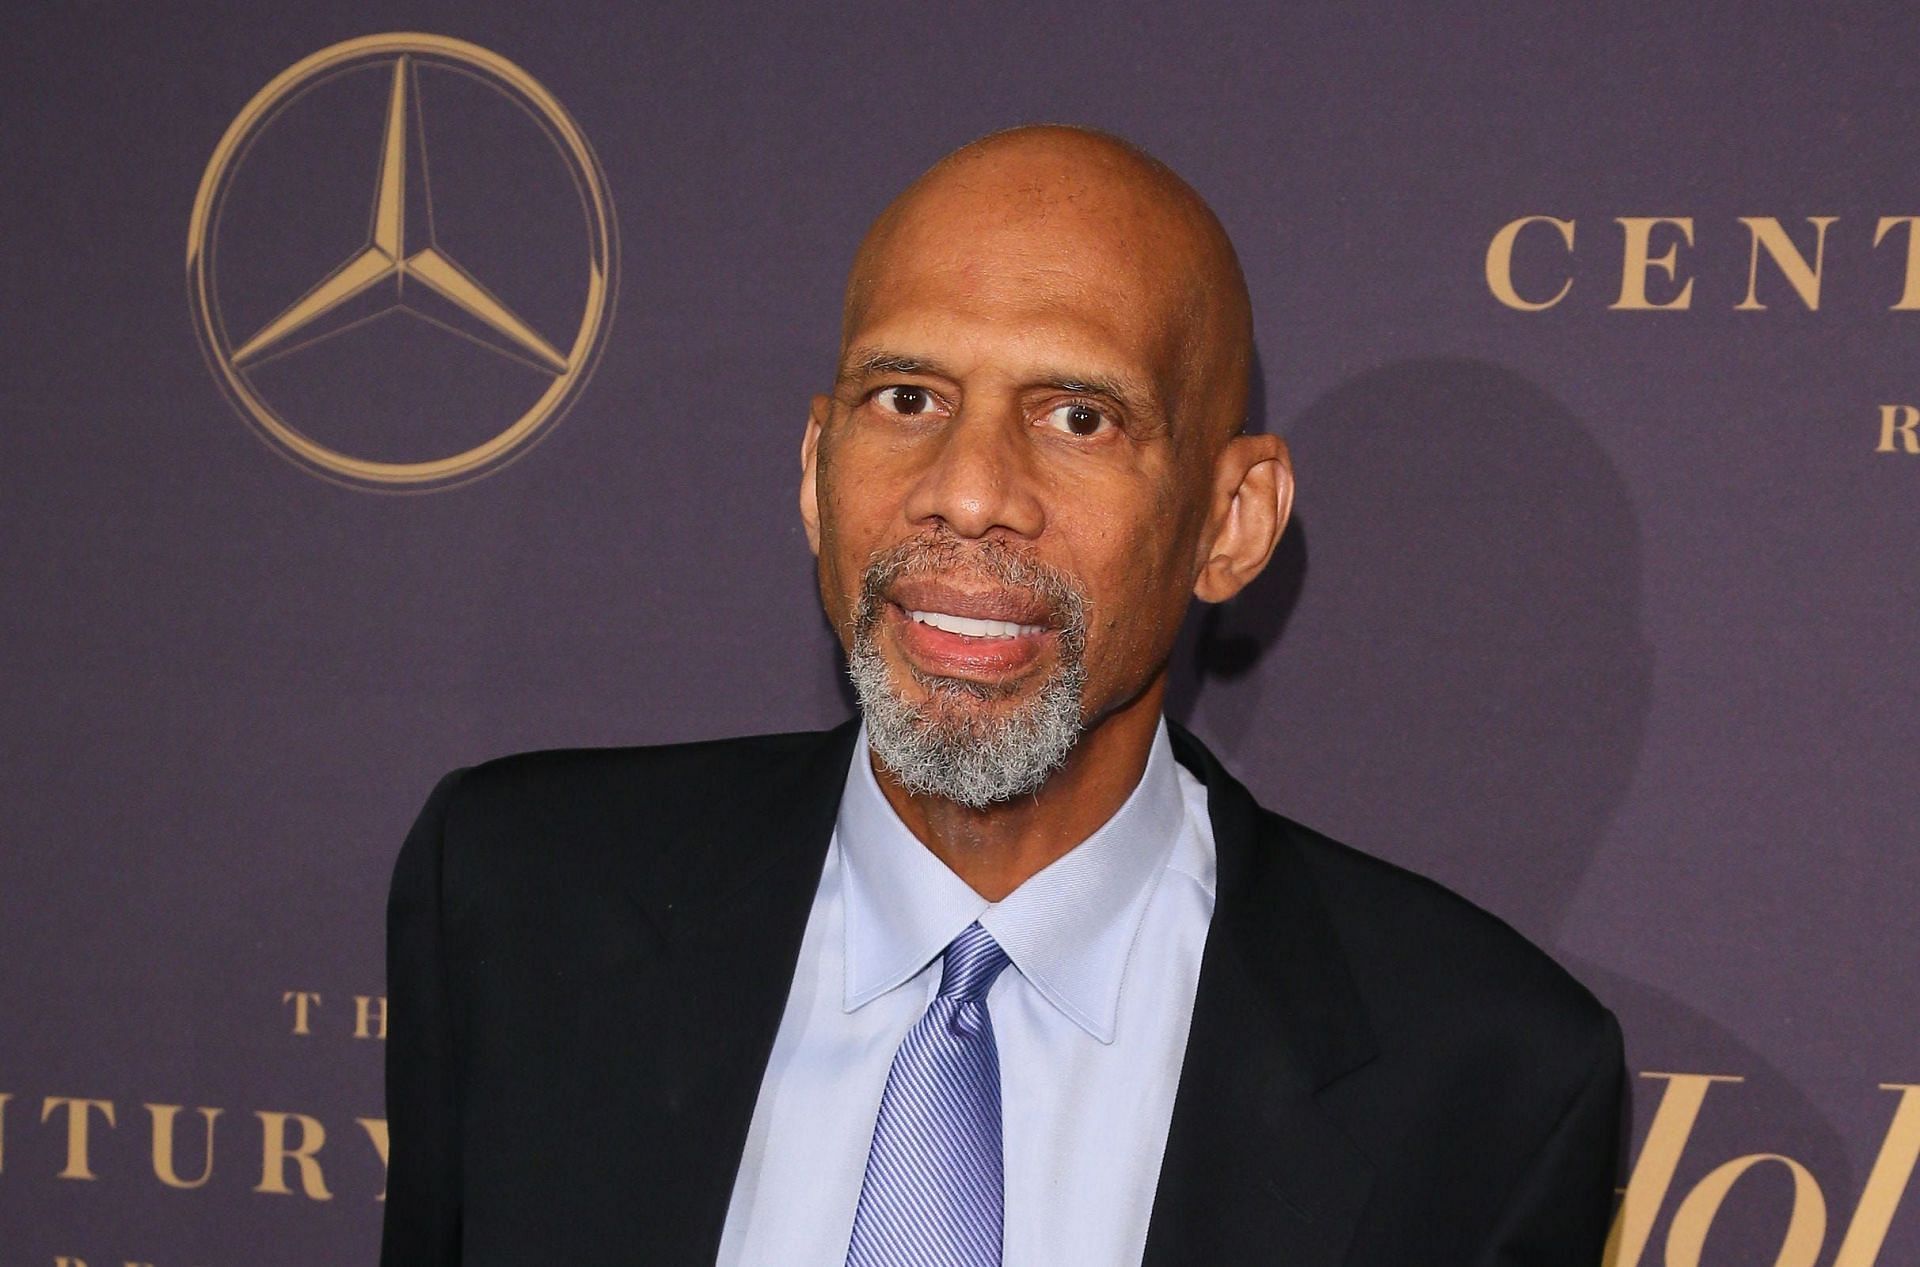 The LA Lakers threw a party for Kareem Abdul-Jabbar&#039;s upcoming 75th birthday. [Photo: USA Today]